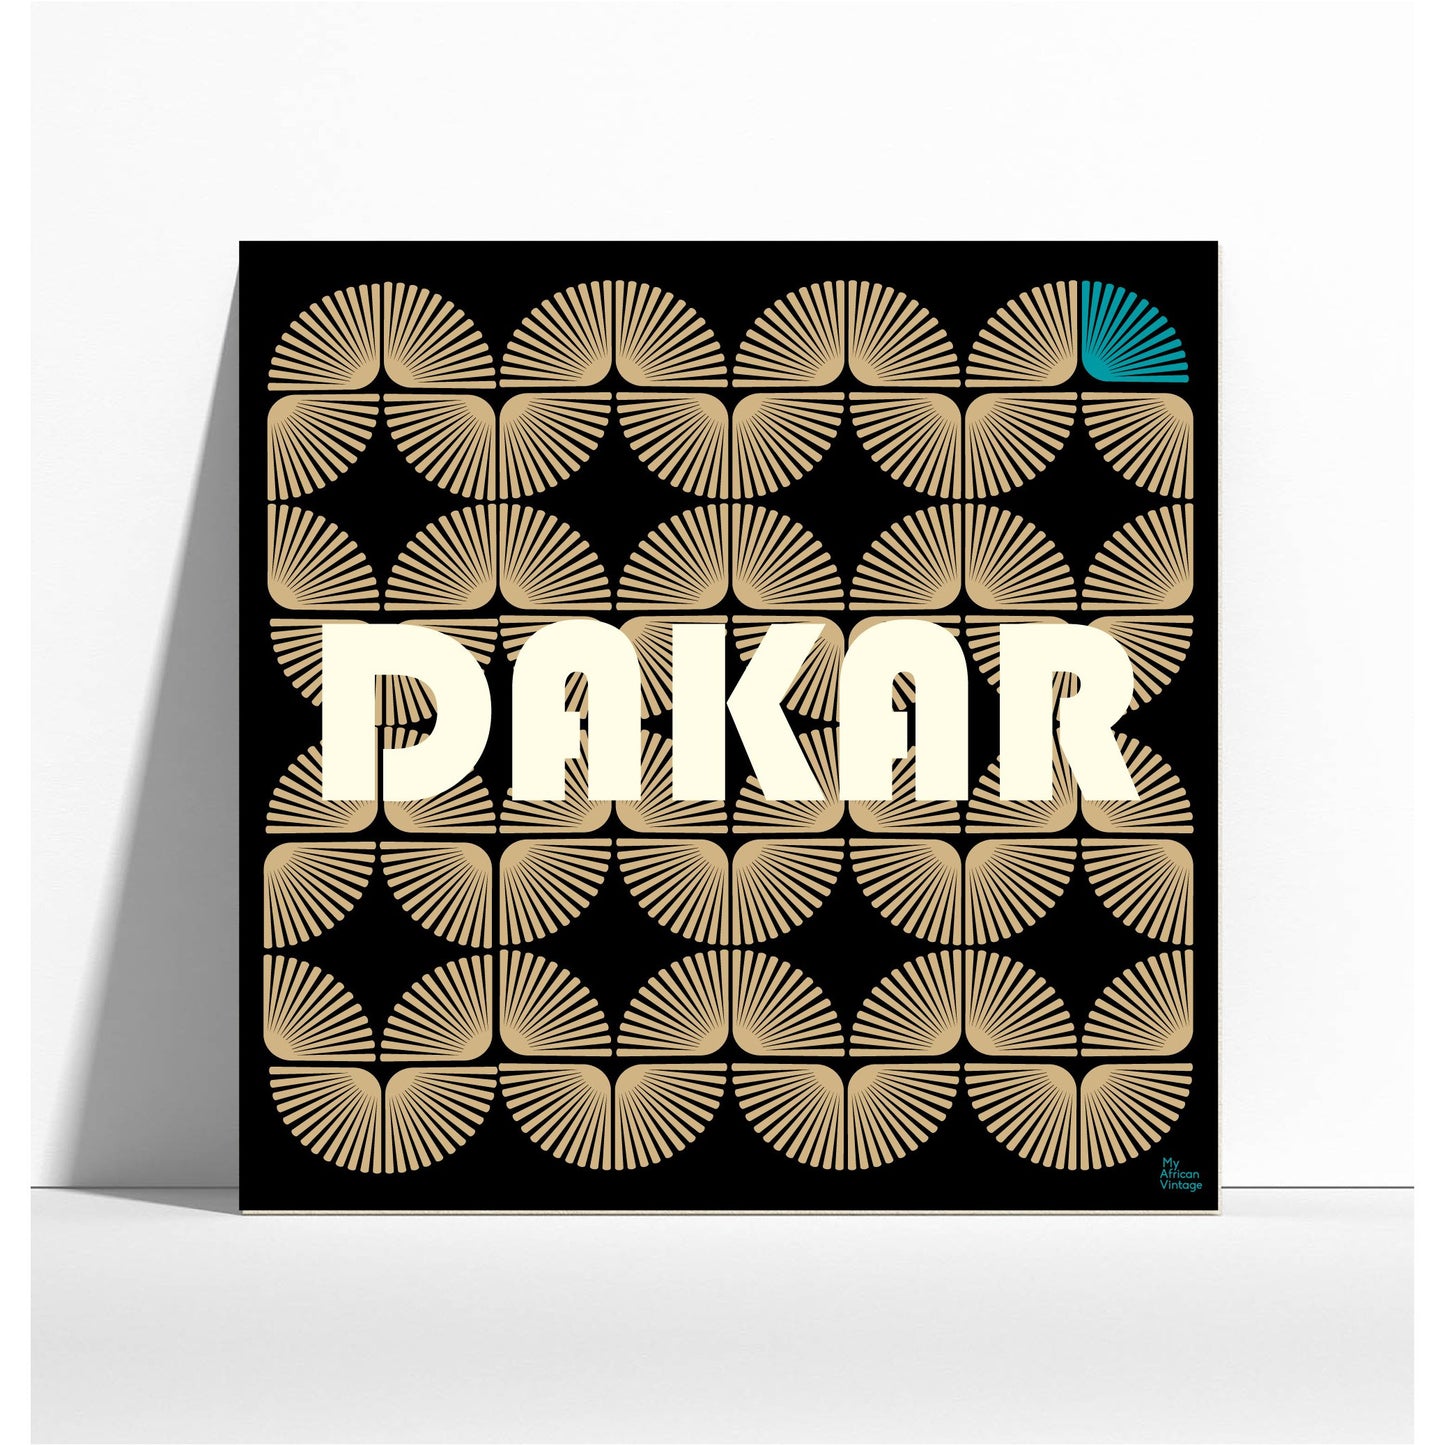 "Dakar" retro style poster - "My African Vintage" collection